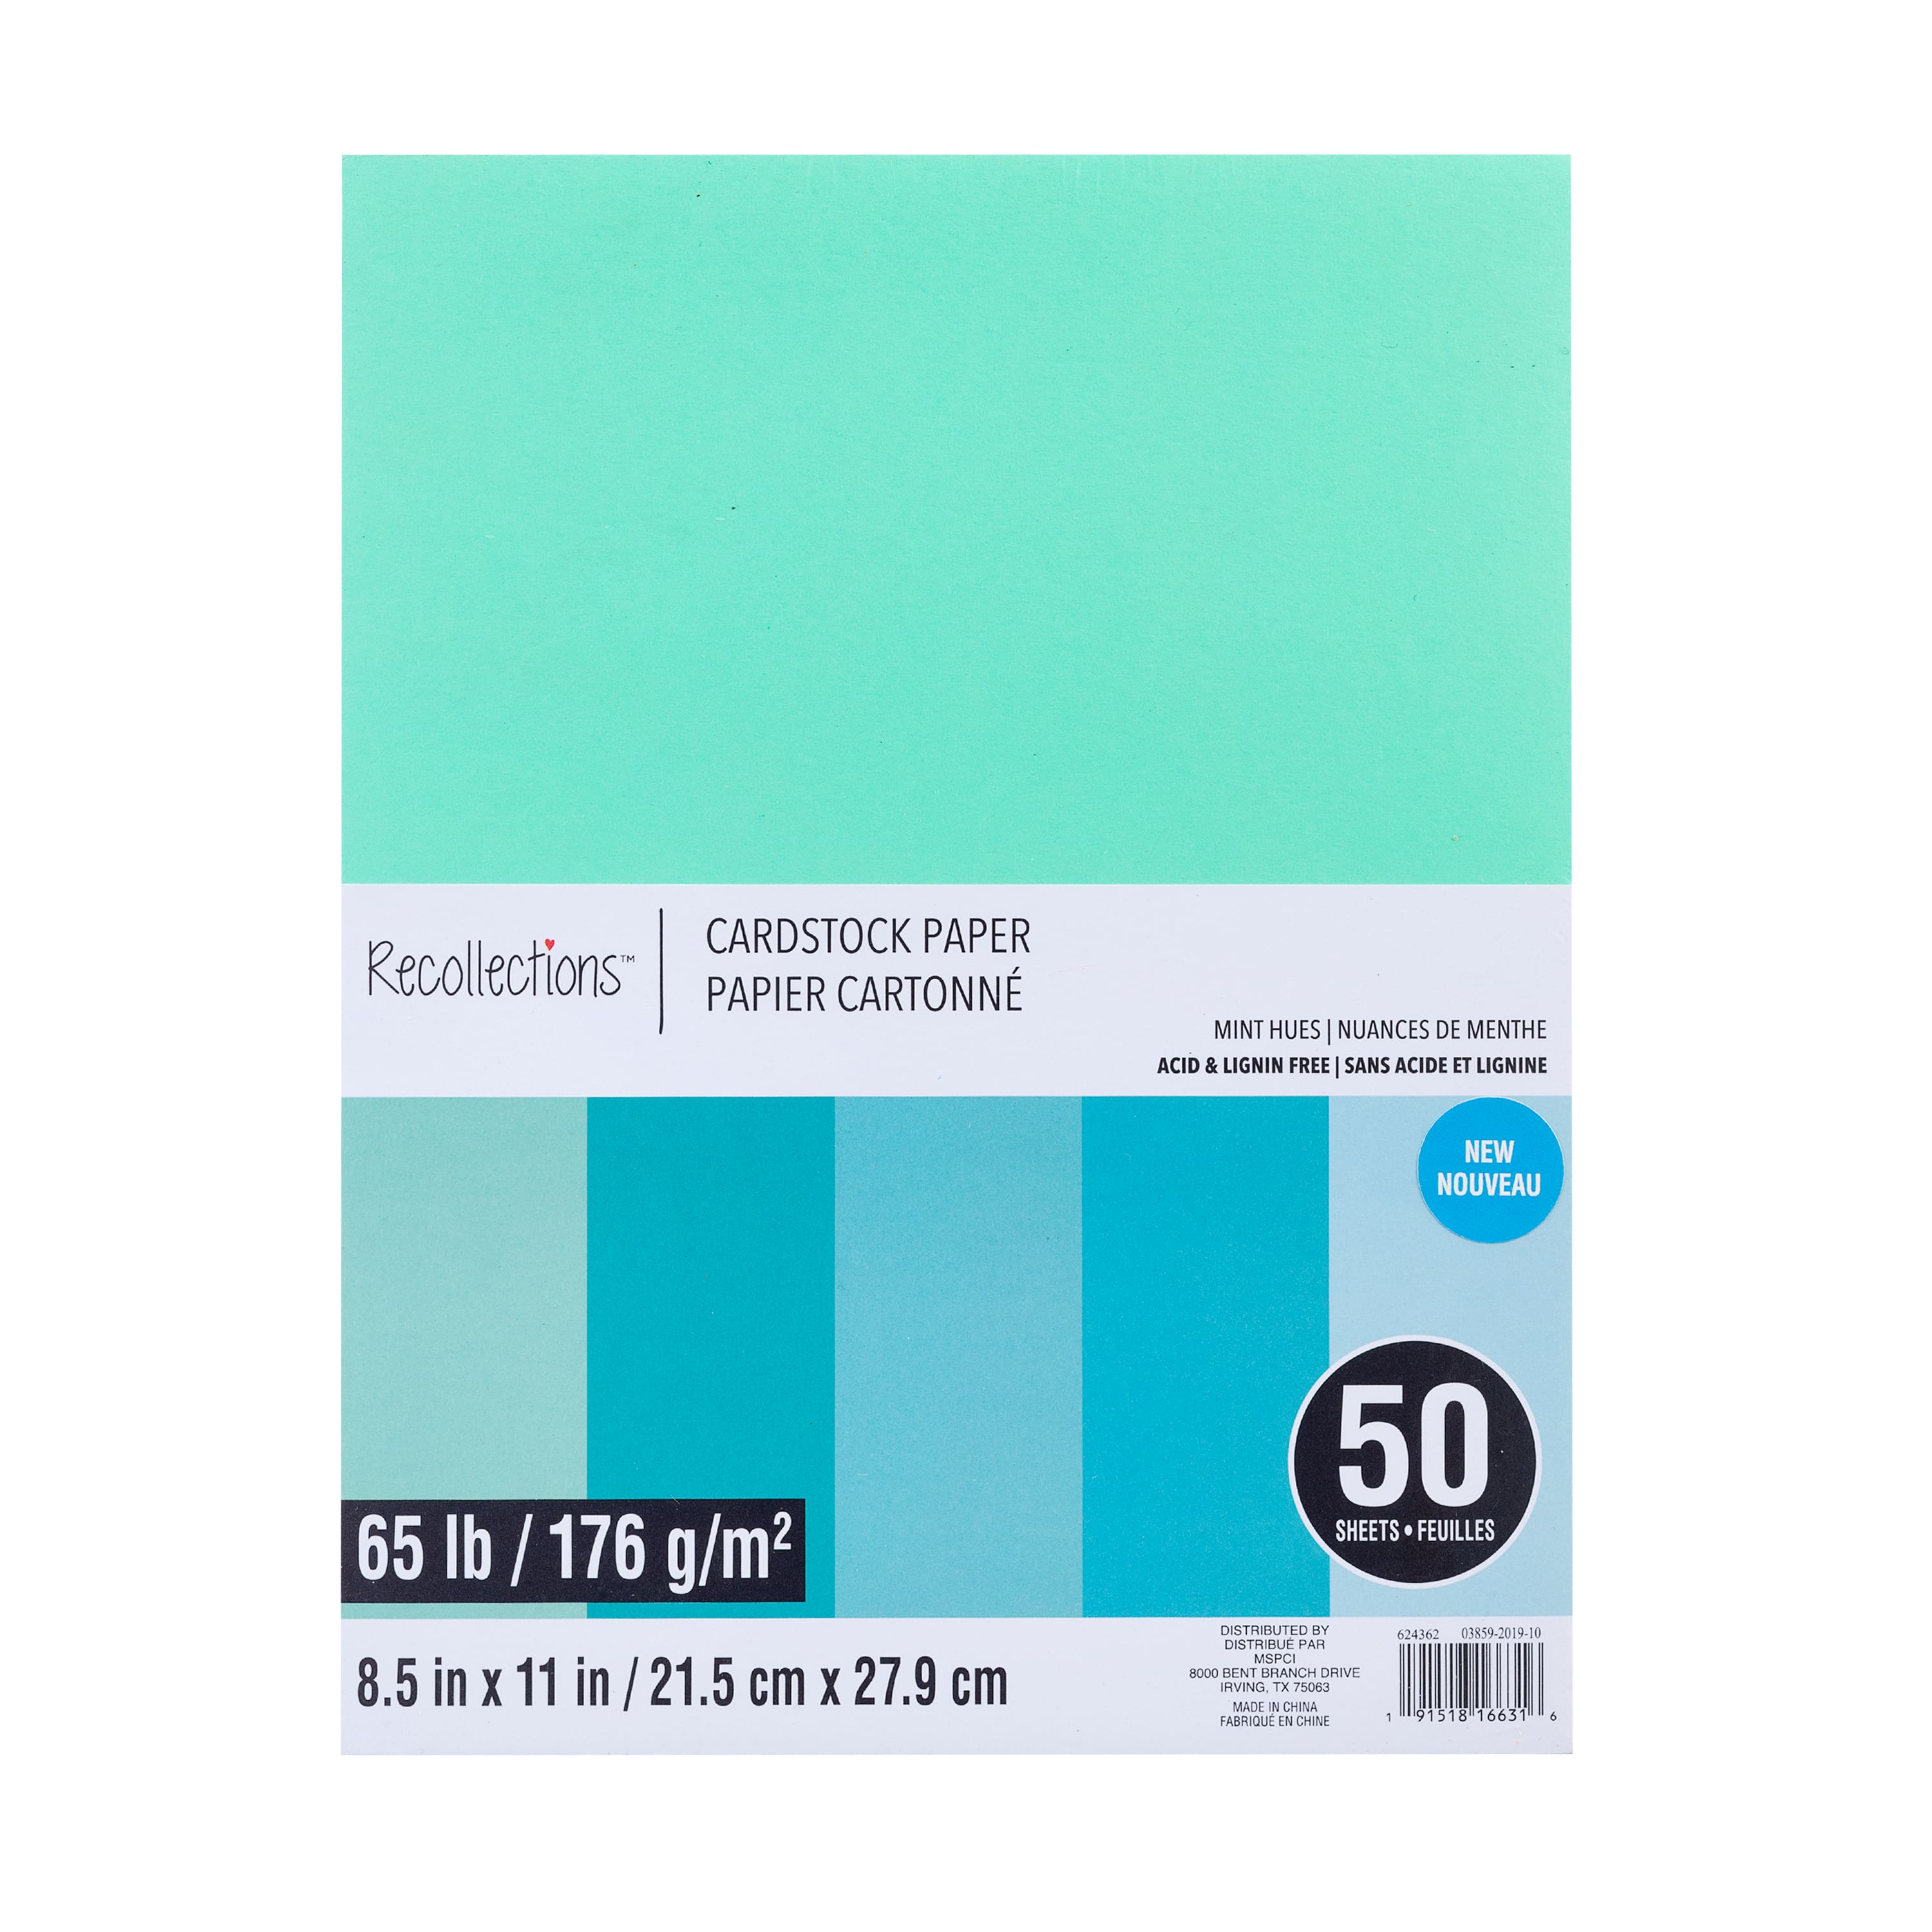 Recollections  SKY BLUE  Cardstock Paper 8.5 x 11 50 sheets